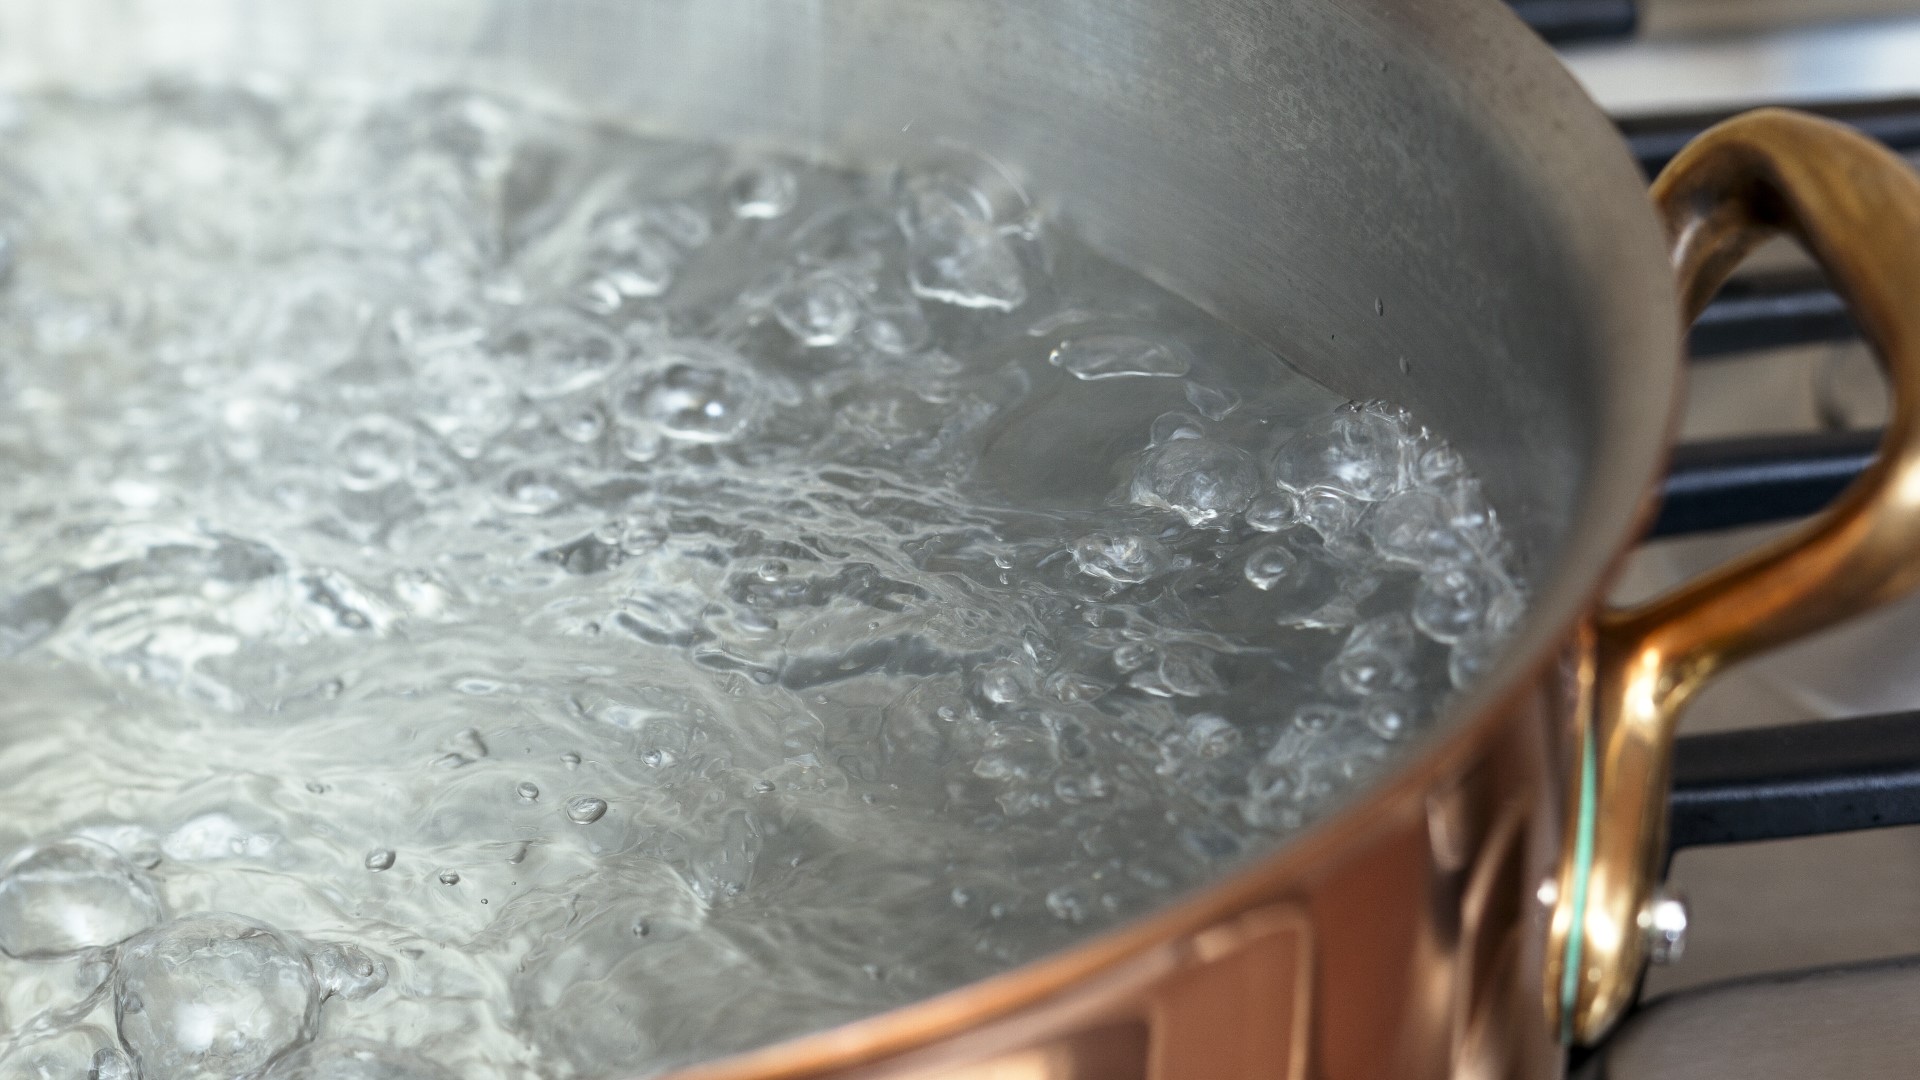 Boil advisories have been issued for Clayton, Forsyth and Butts counties.